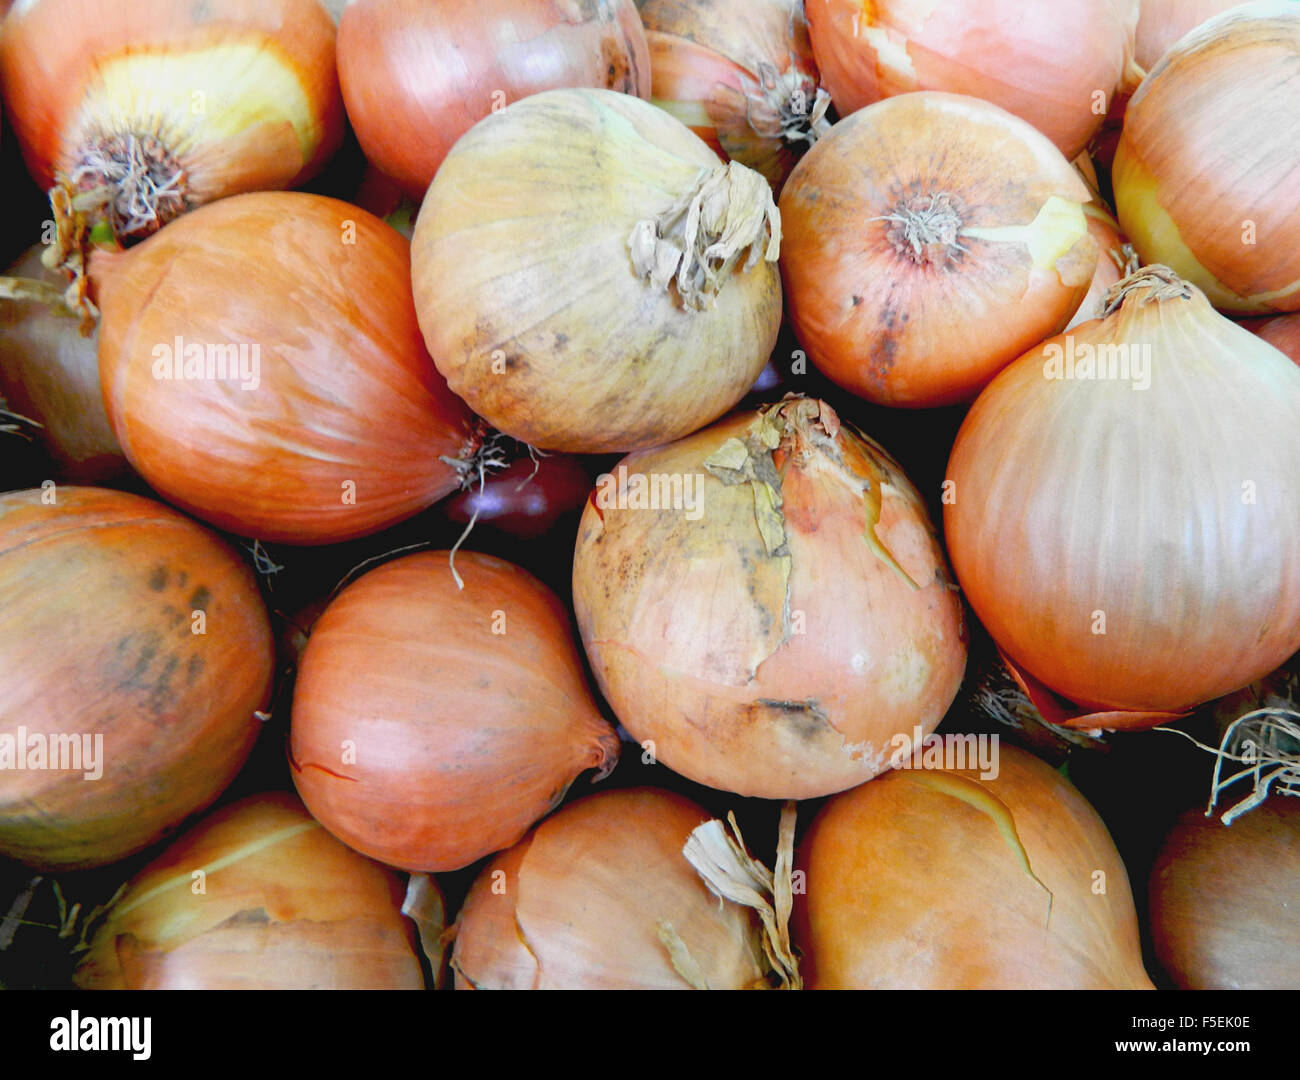 Onions at the market stall exposed to customers. Stock Photo